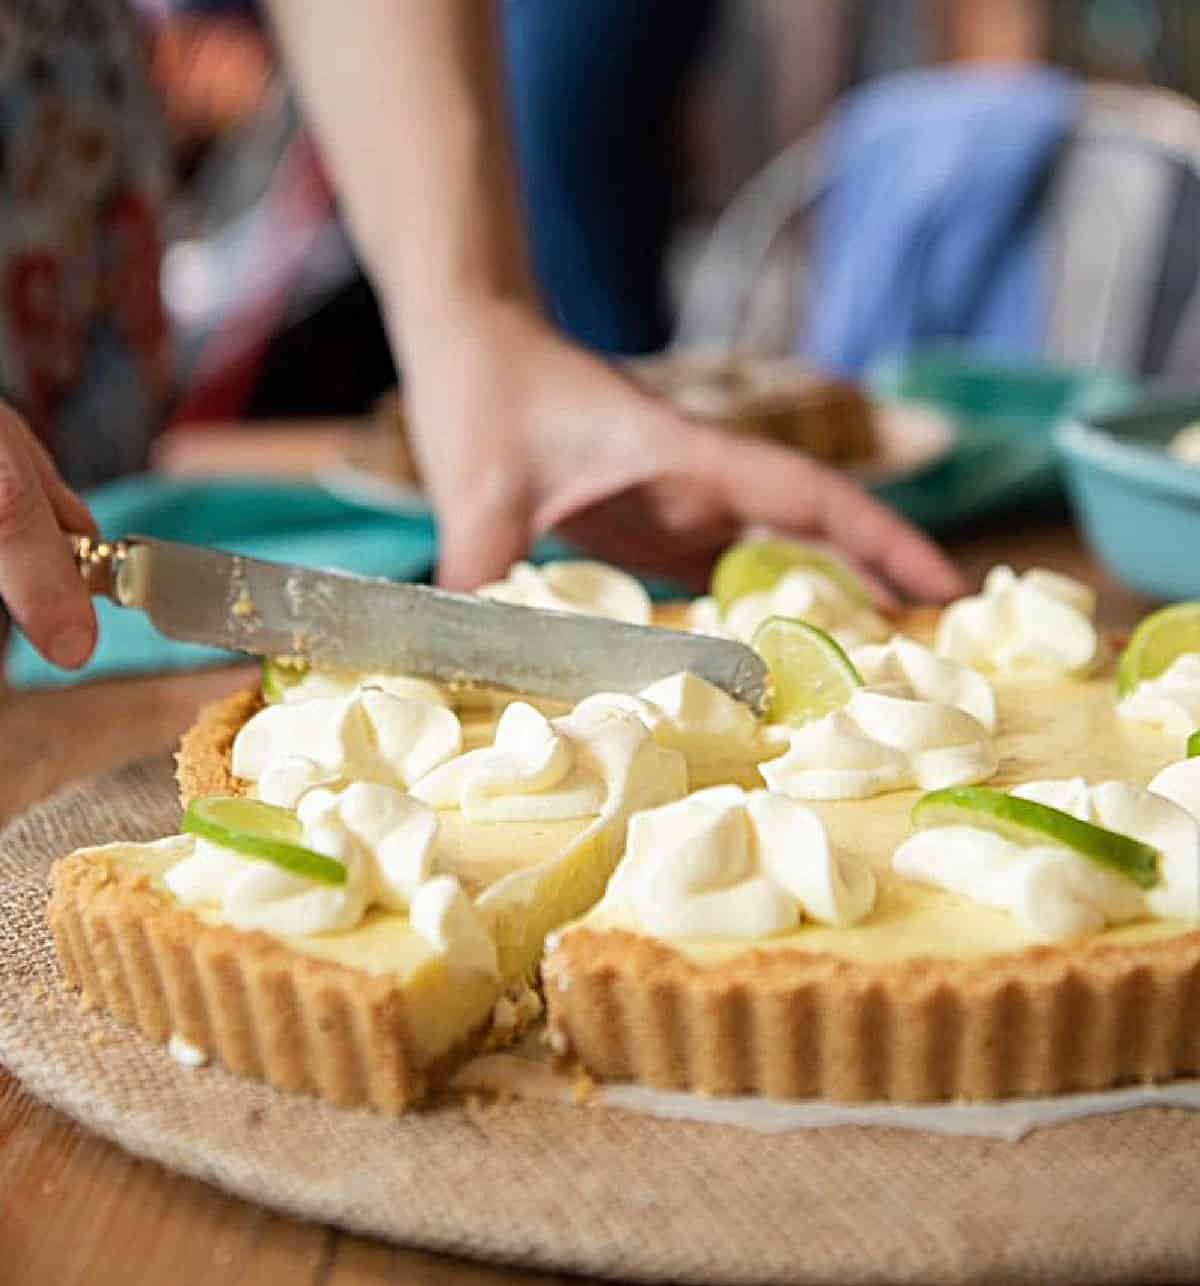 Hands with silver knife cutting a lime pie with cream on top, burlap surface.